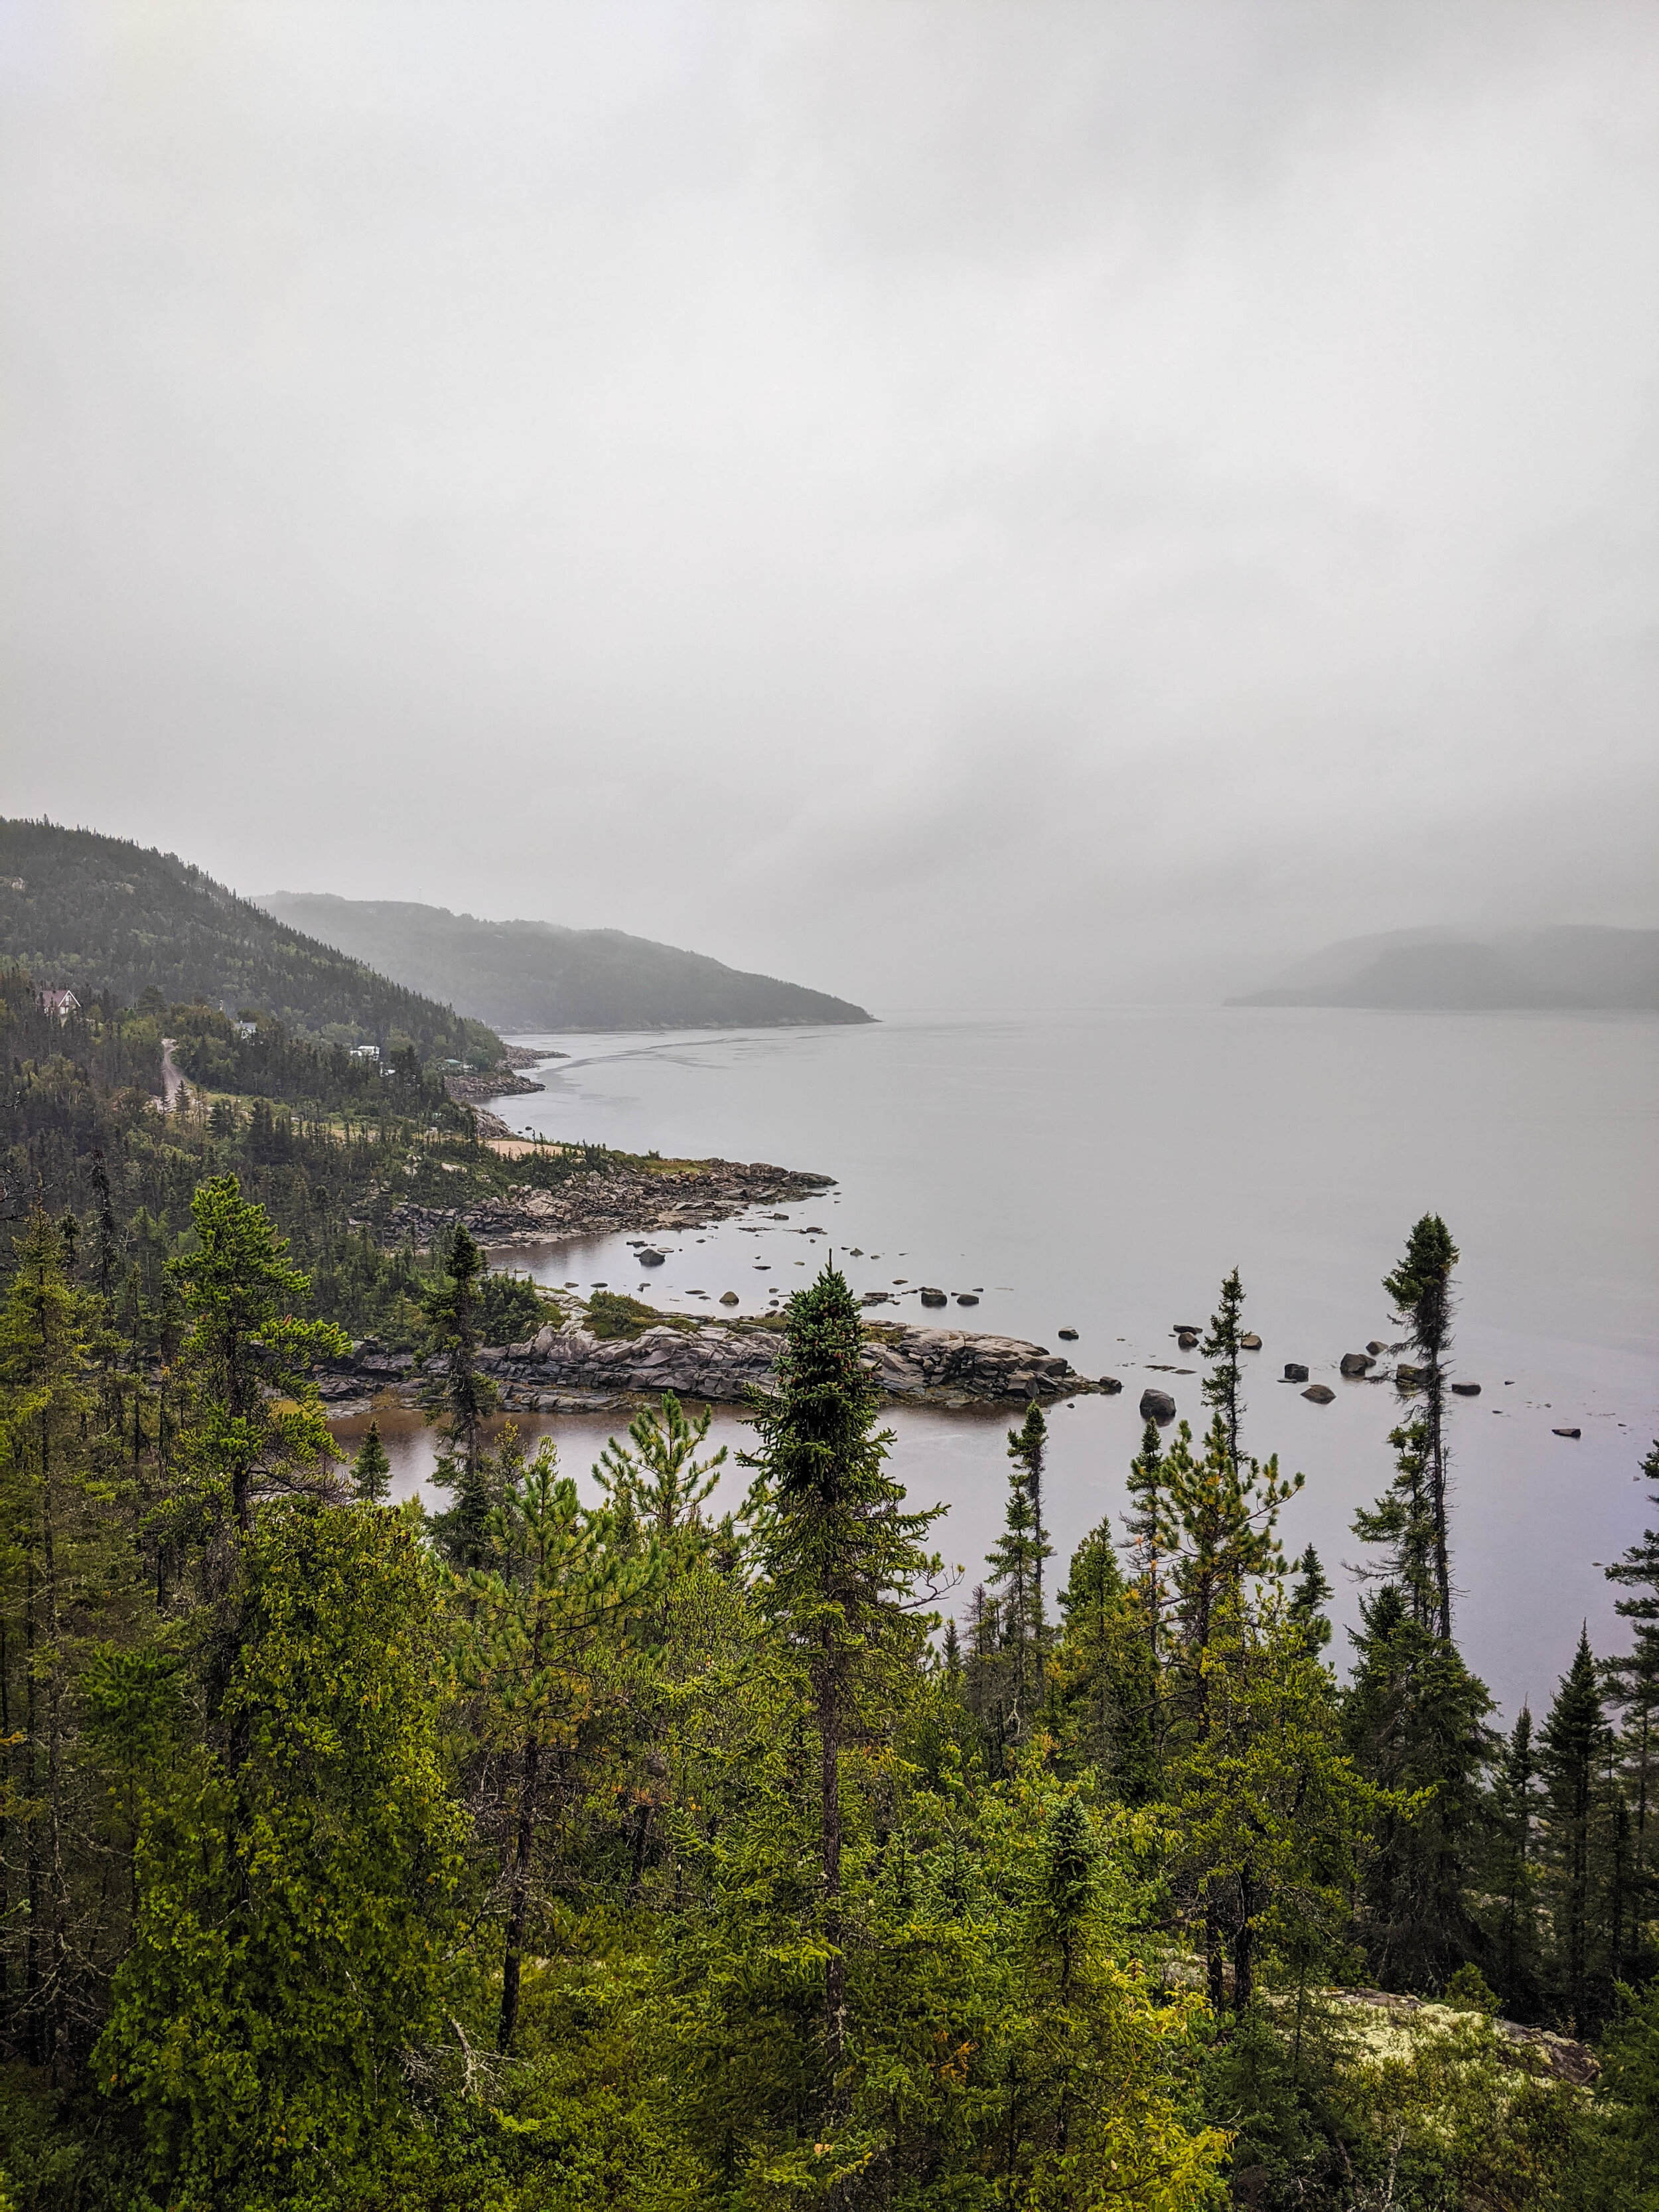 Parc national du Fjord-du-Saguenay, one of the things to do in Tadoussac